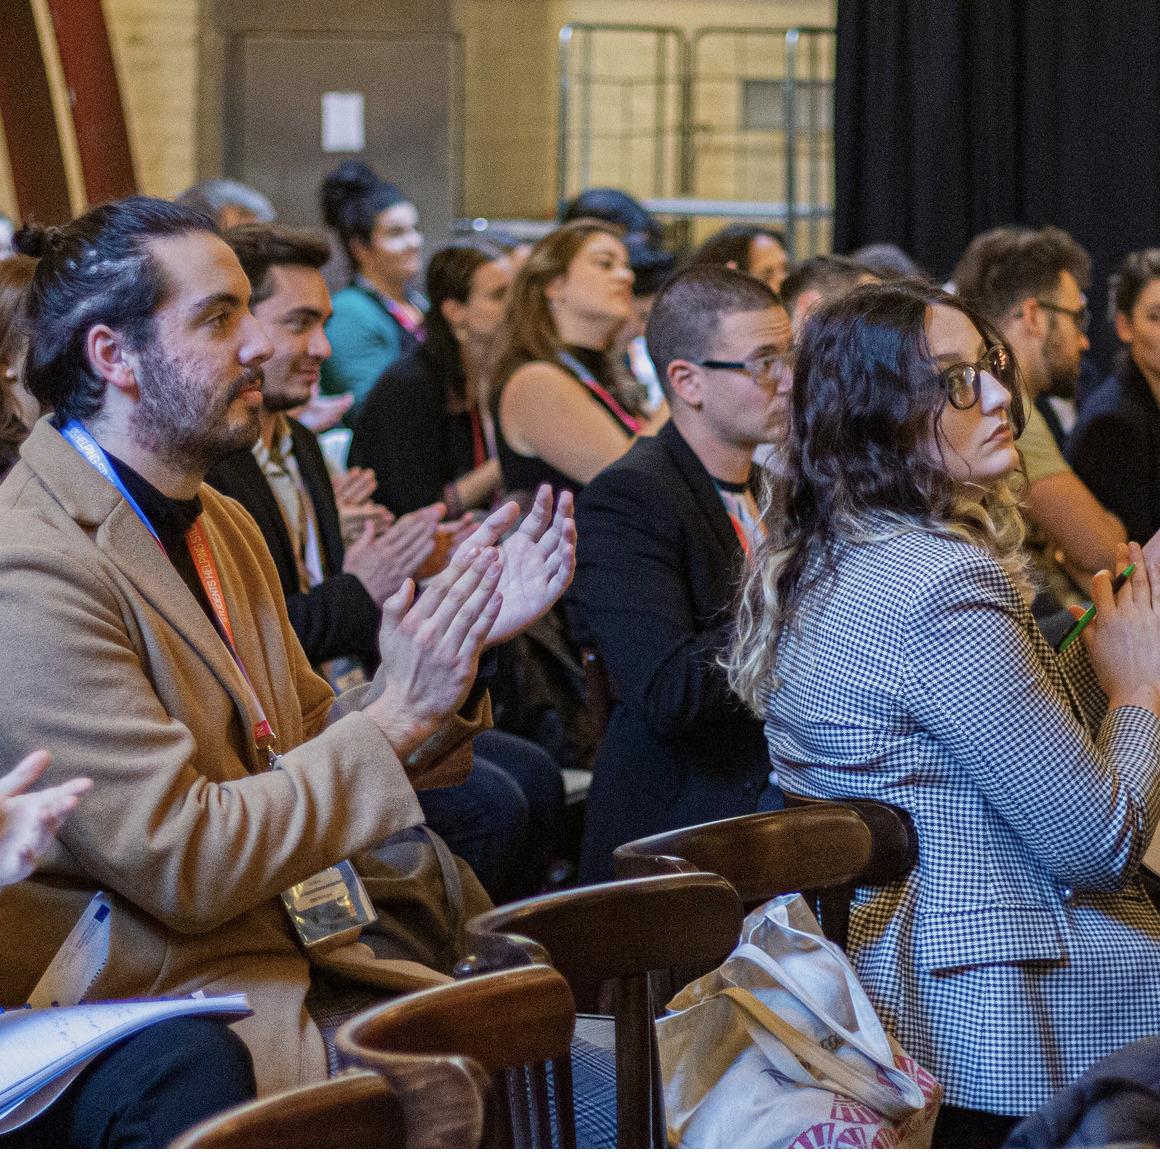 Image of a people applauding at a conference.